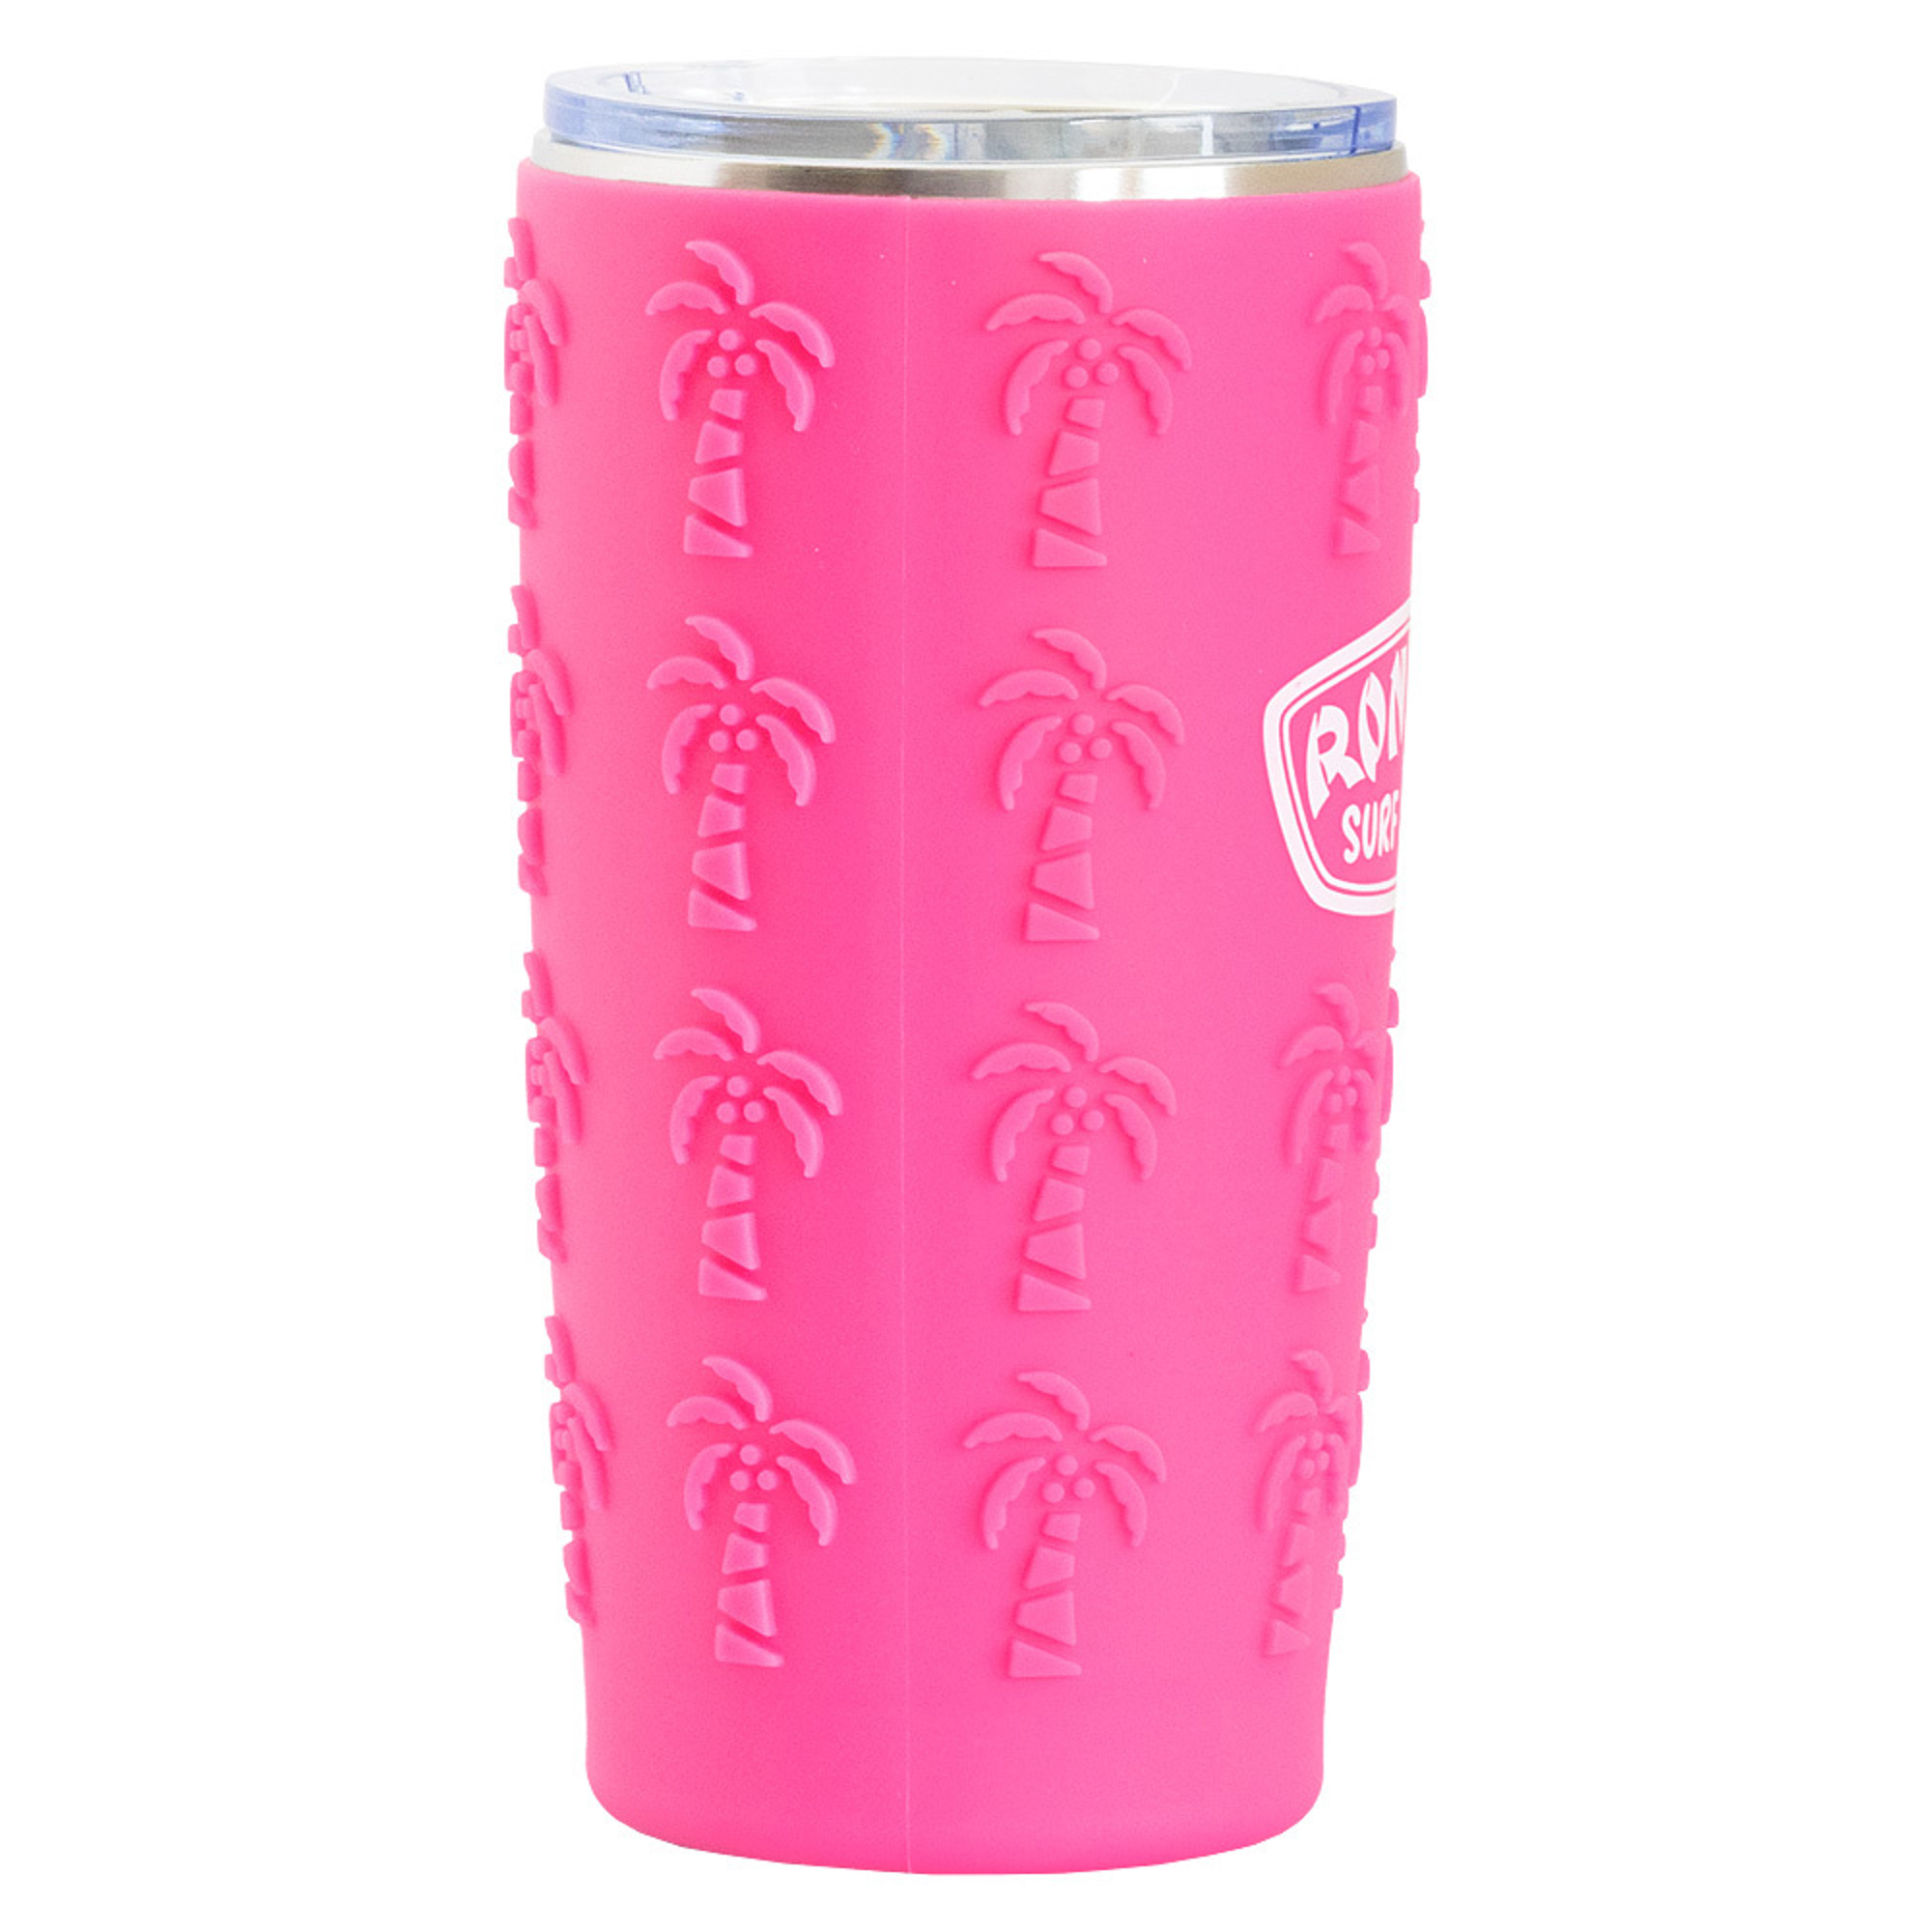 20 oz Insulated Stainless Steel Tumbler with Sure Grip Design